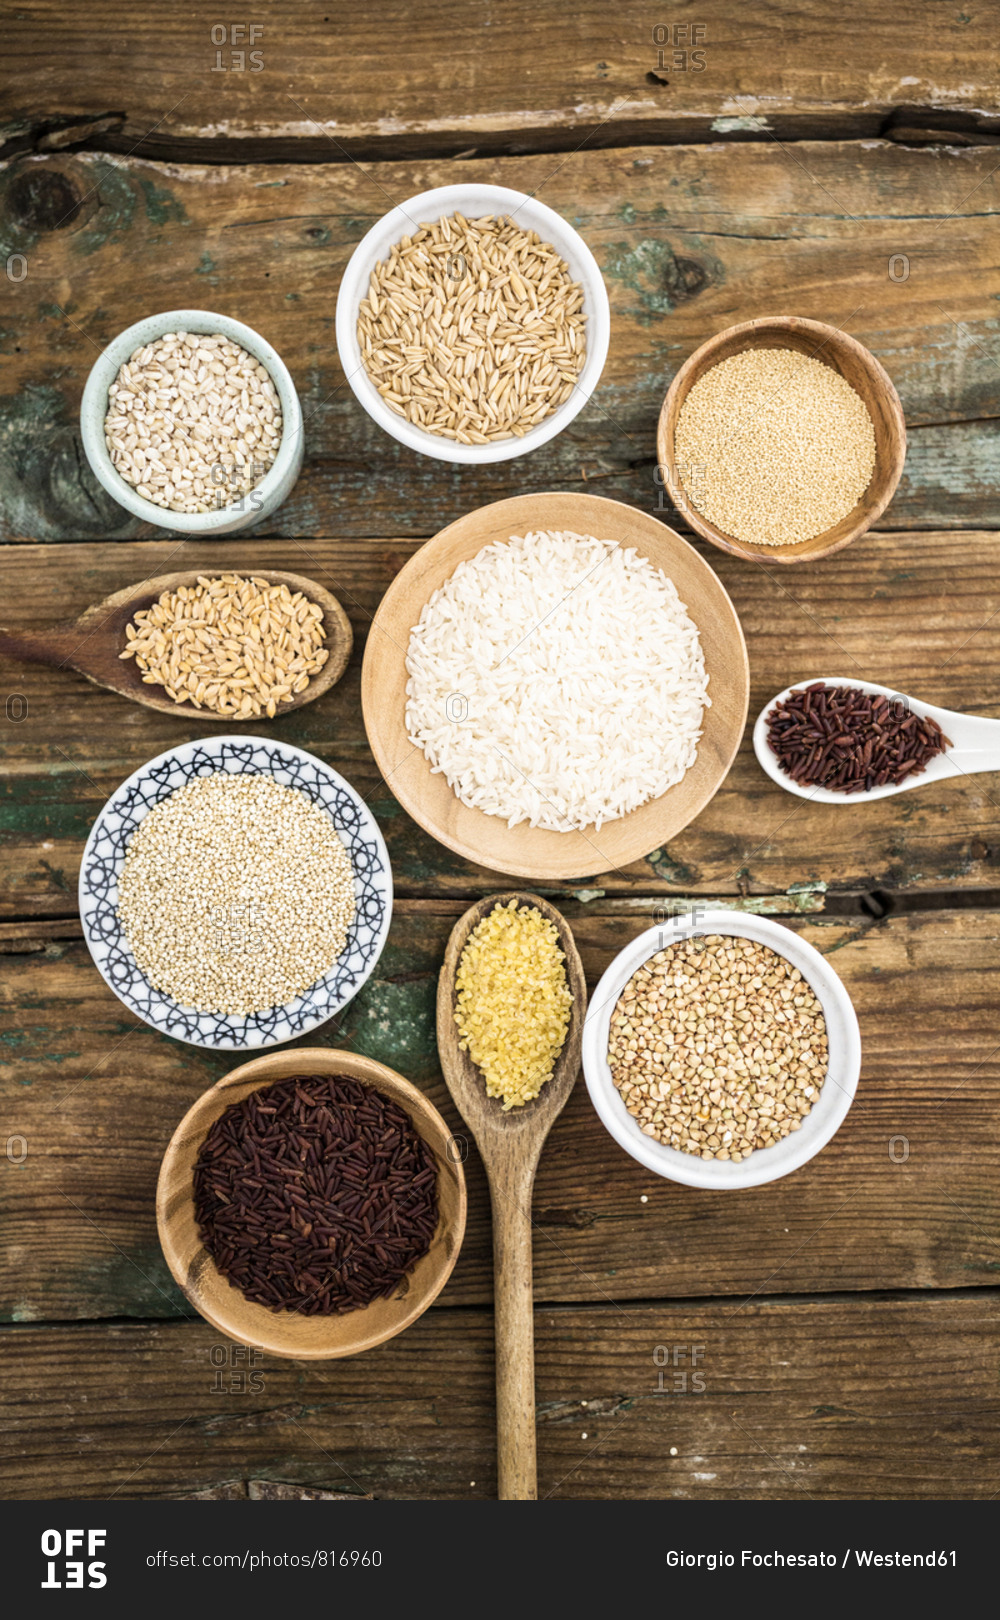 Cereal mix: red rice- barley- amaranth- quinoa- rice- bulgur- spelled- oats and buckwheat